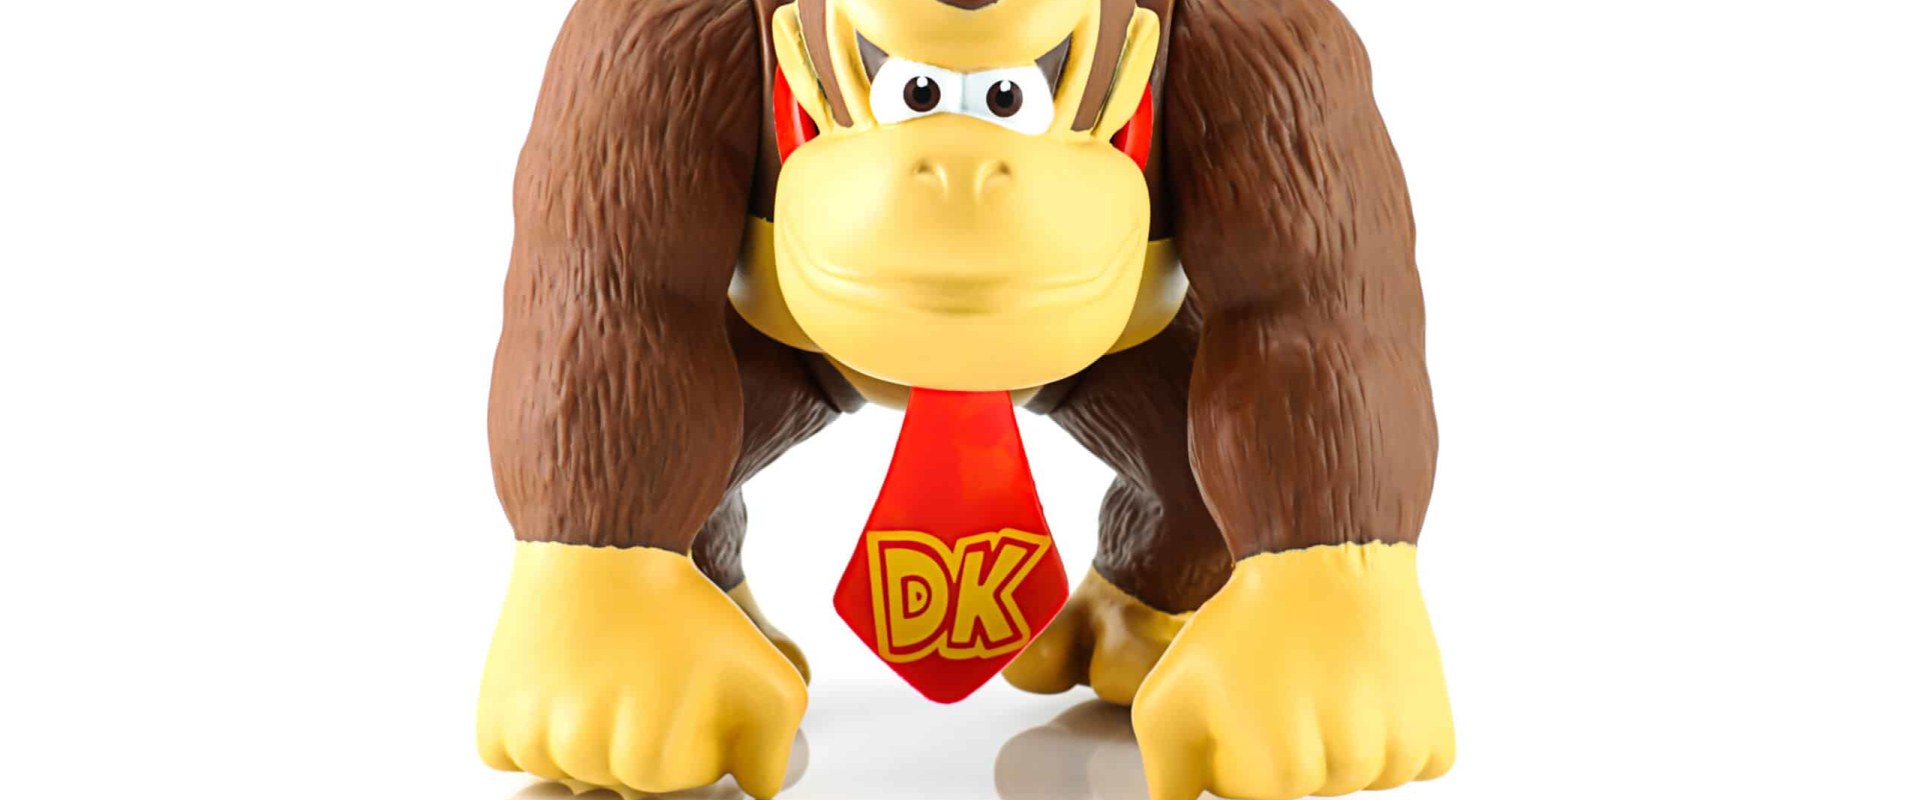 The History of Donkey Kong: A Popular Arcade Game